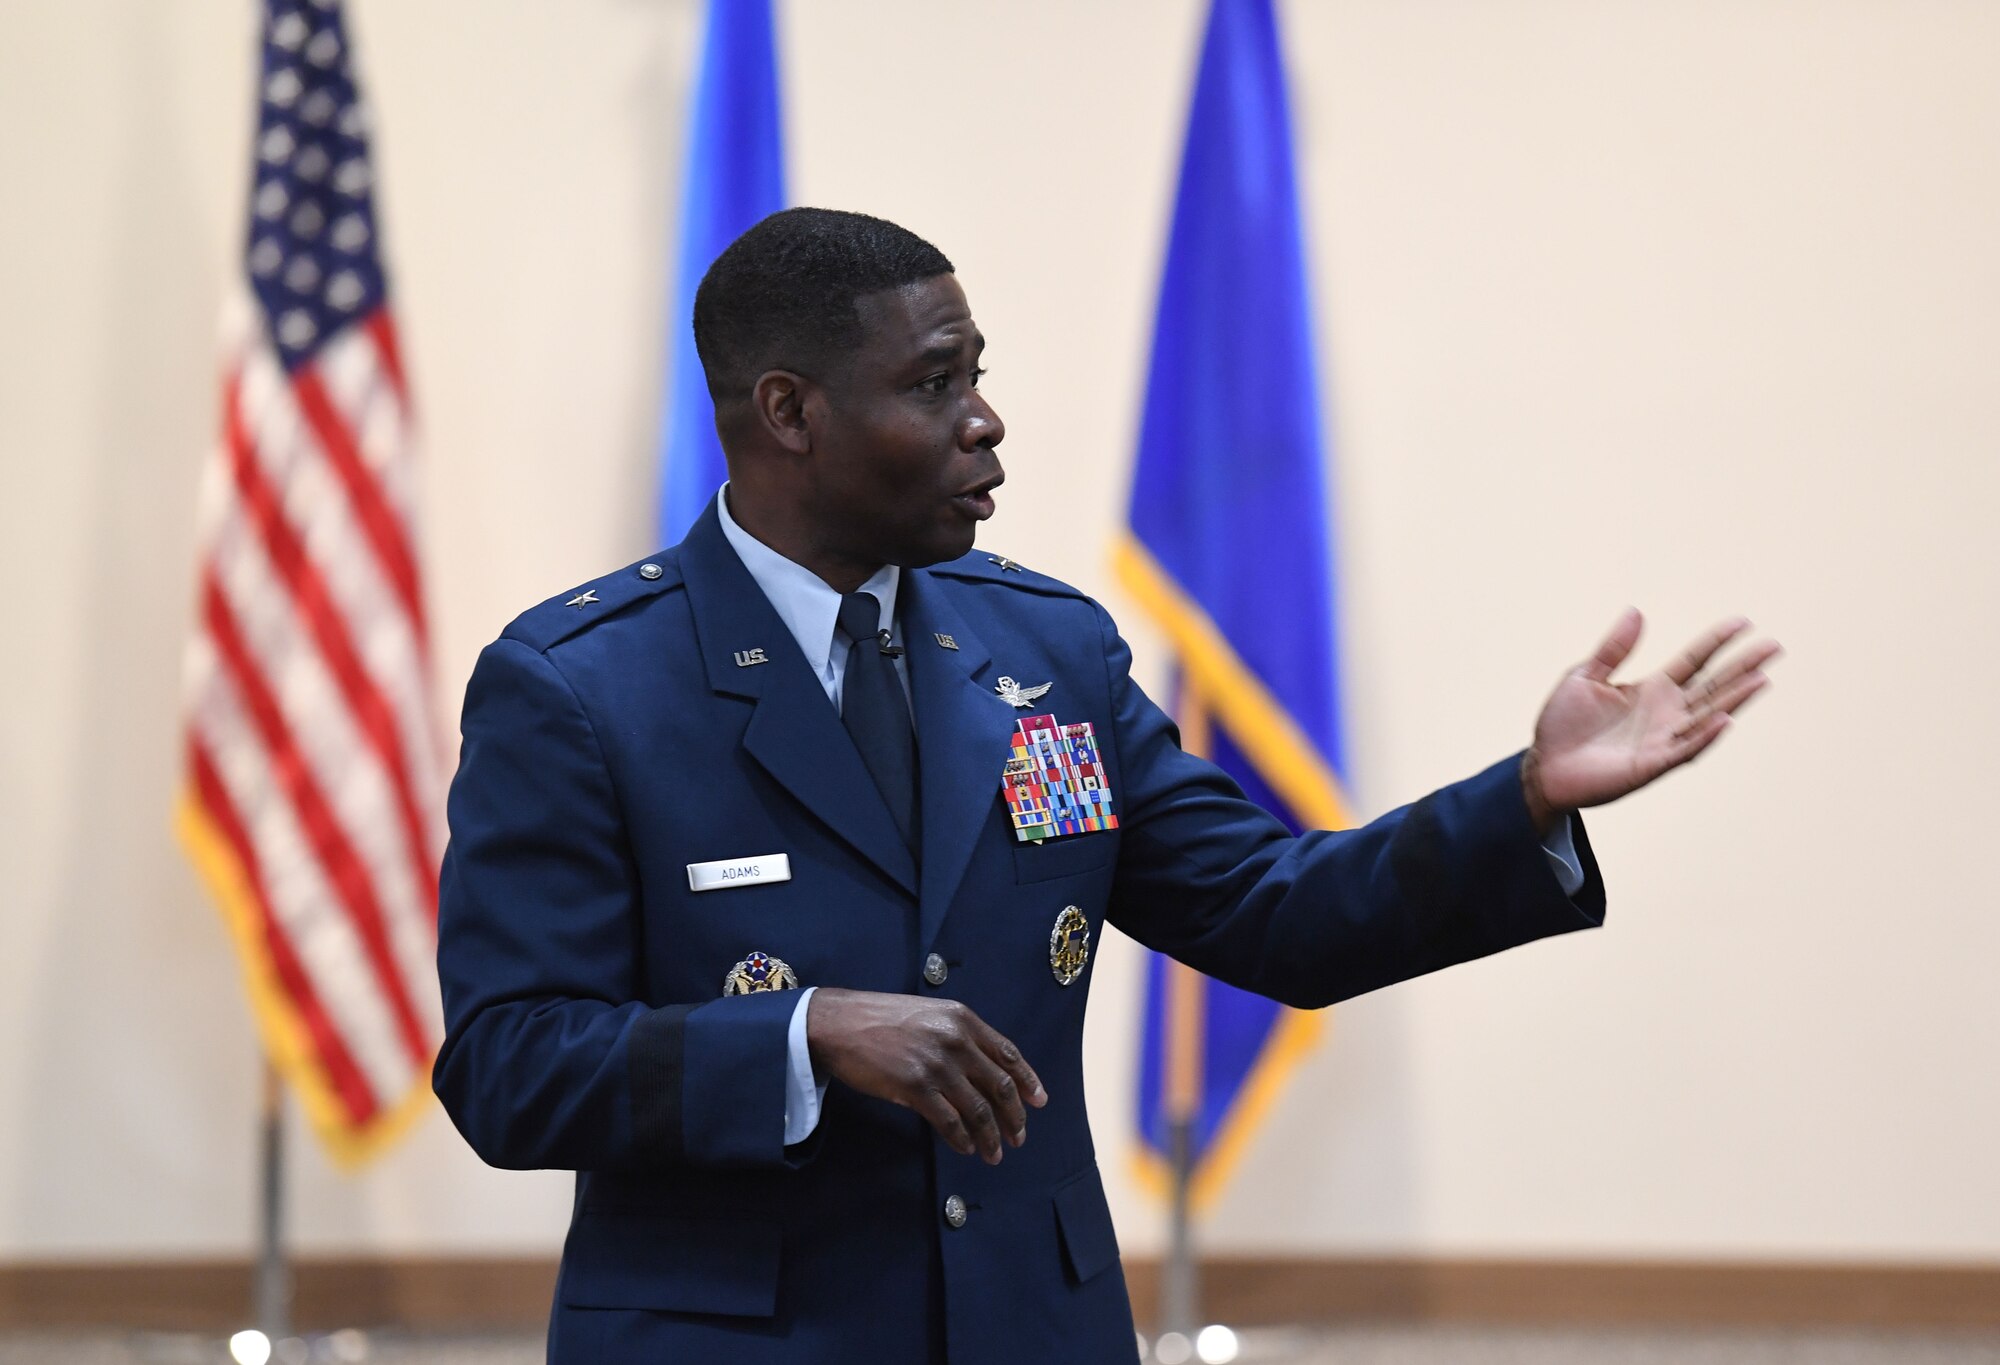 U.S. Air Force Brig. Gen. Terrence Adams, Director, Cyberspace Operations and Warfighter Communications, Office of the Deputy Chief of Staff for Intelligence, Surveillance, Reconnaissance, and Cyber Effects Operations, Headquarters Pentagon, delivers remarks during the annual Dr. Martin Luther King Jr. Luncheon inside the Roberts Consolidated Aircraft Maintenance Facility at Keesler Air Force Base, Mississippi, Jan. 30, 2023.